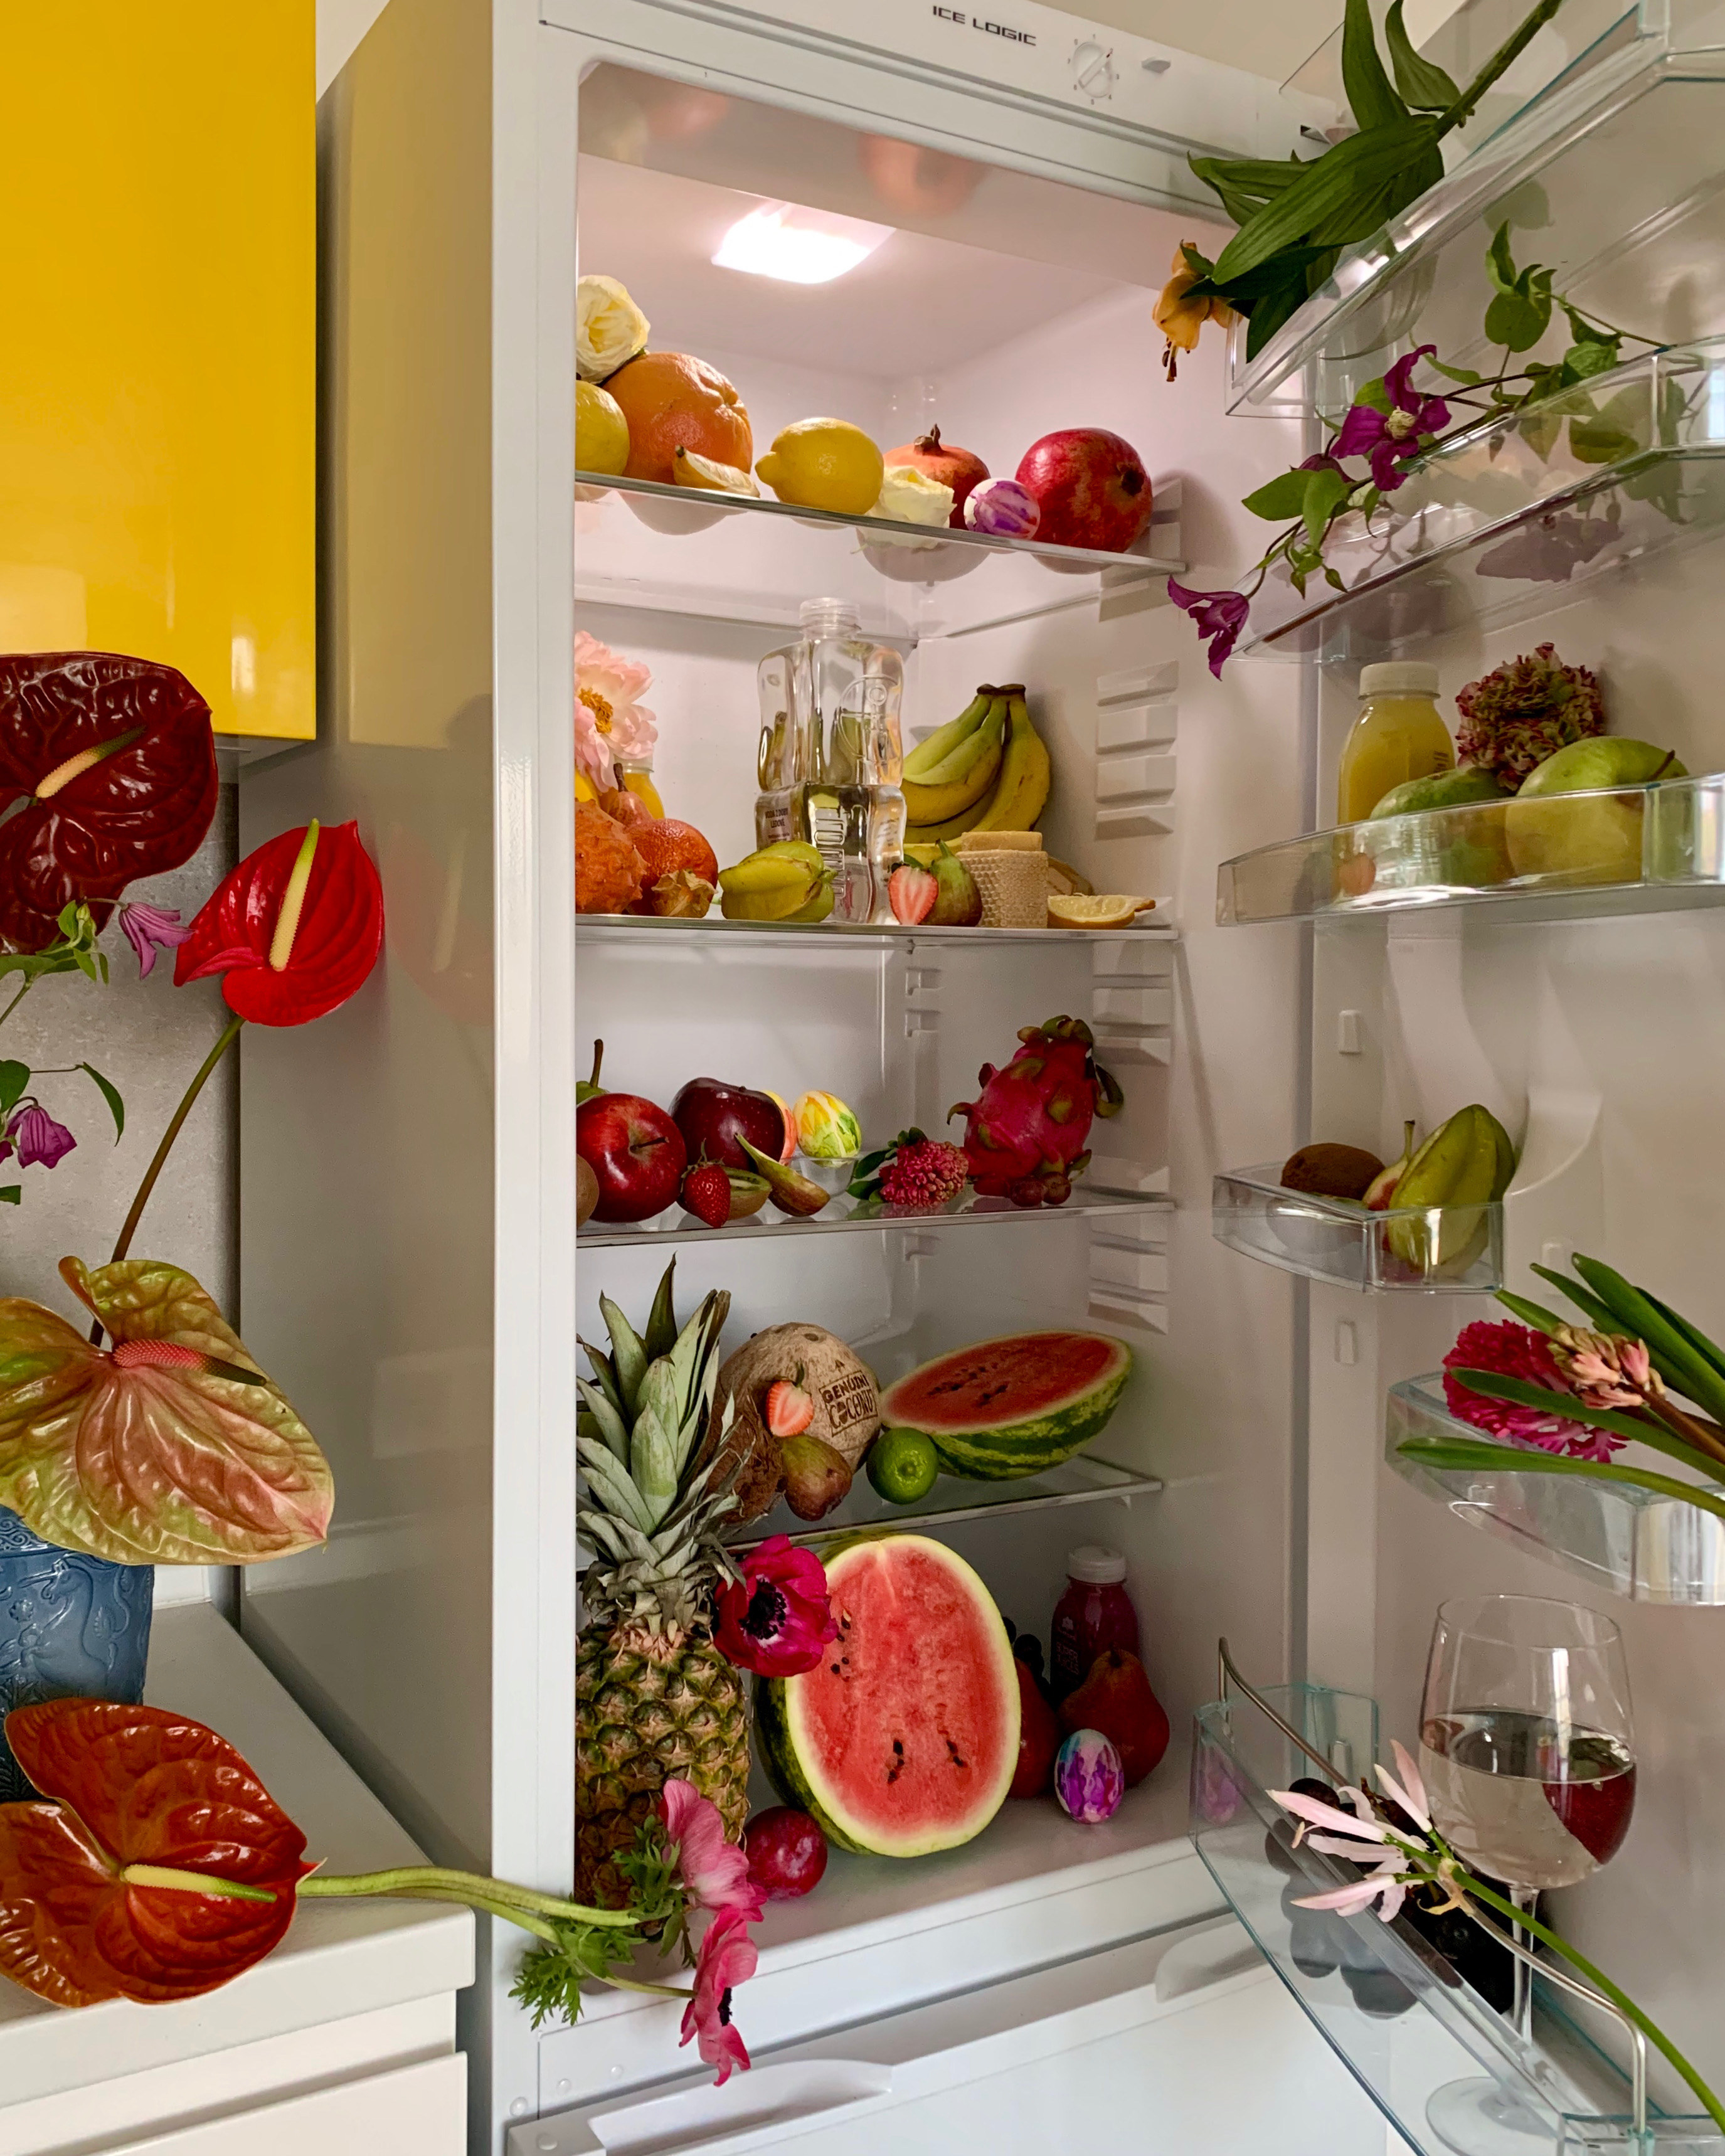 A fridge overflowing with fruit and flowers